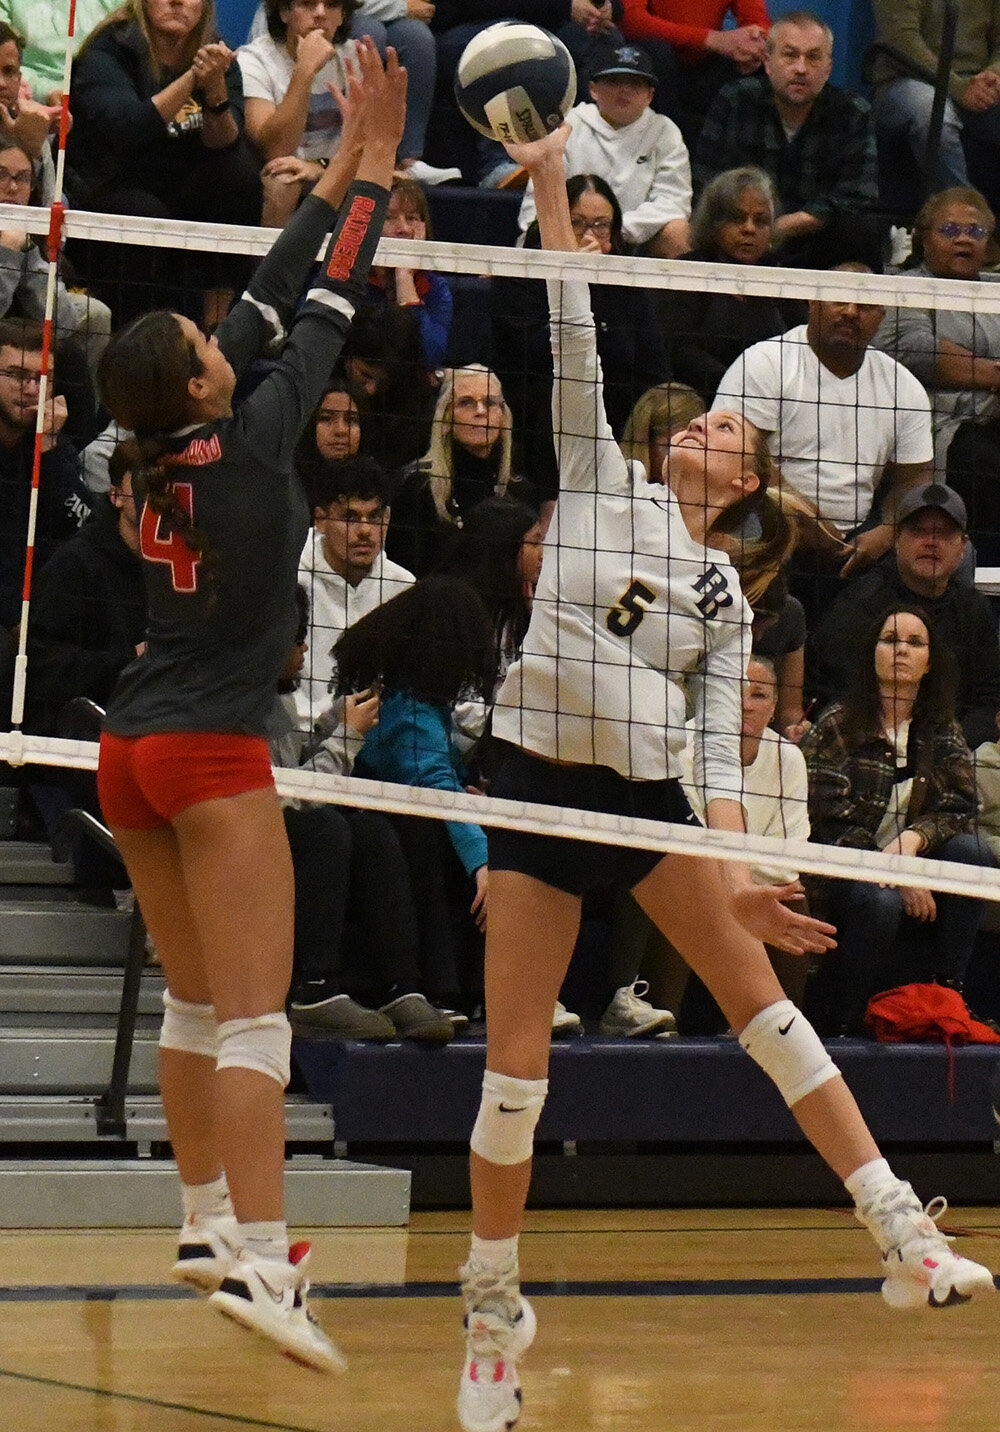 Pine Bush's Taylor Jennings hits the ball over the net as North Rockland's Desirae Hernandez defends during Wednesday's NYSPHSAA Class AAA subregional at Wallkill High School.